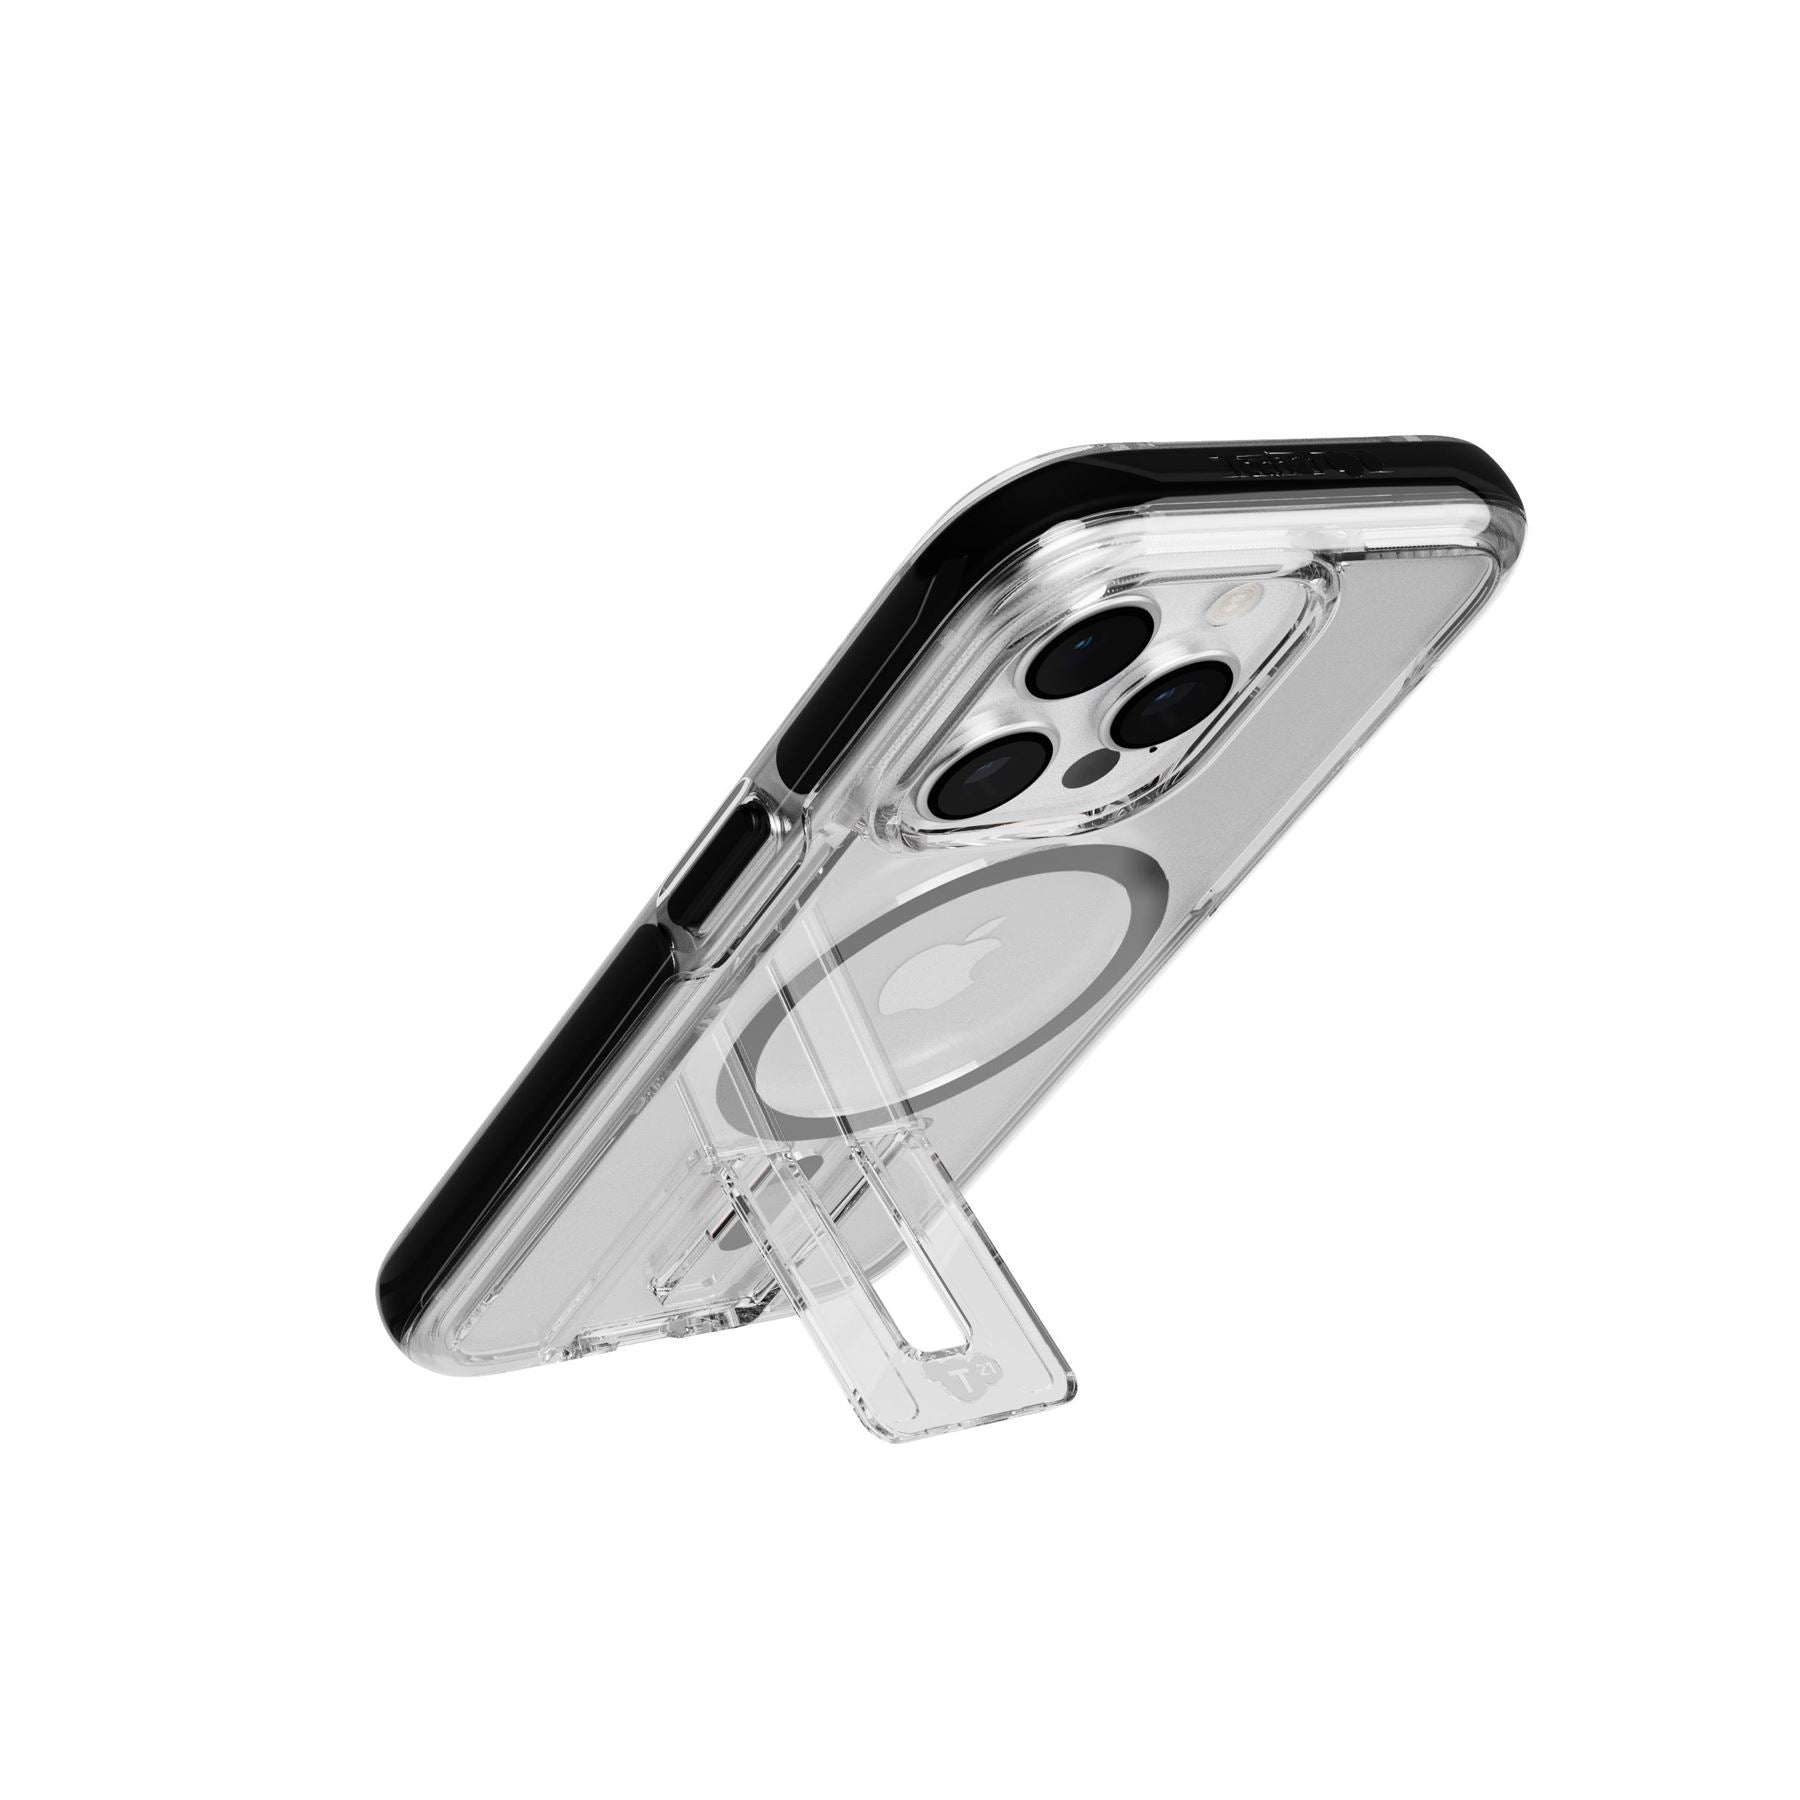 Evo Crystal Kick - Apple iPhone 15 Pro Case MagSafe® Compatible - Clear Black